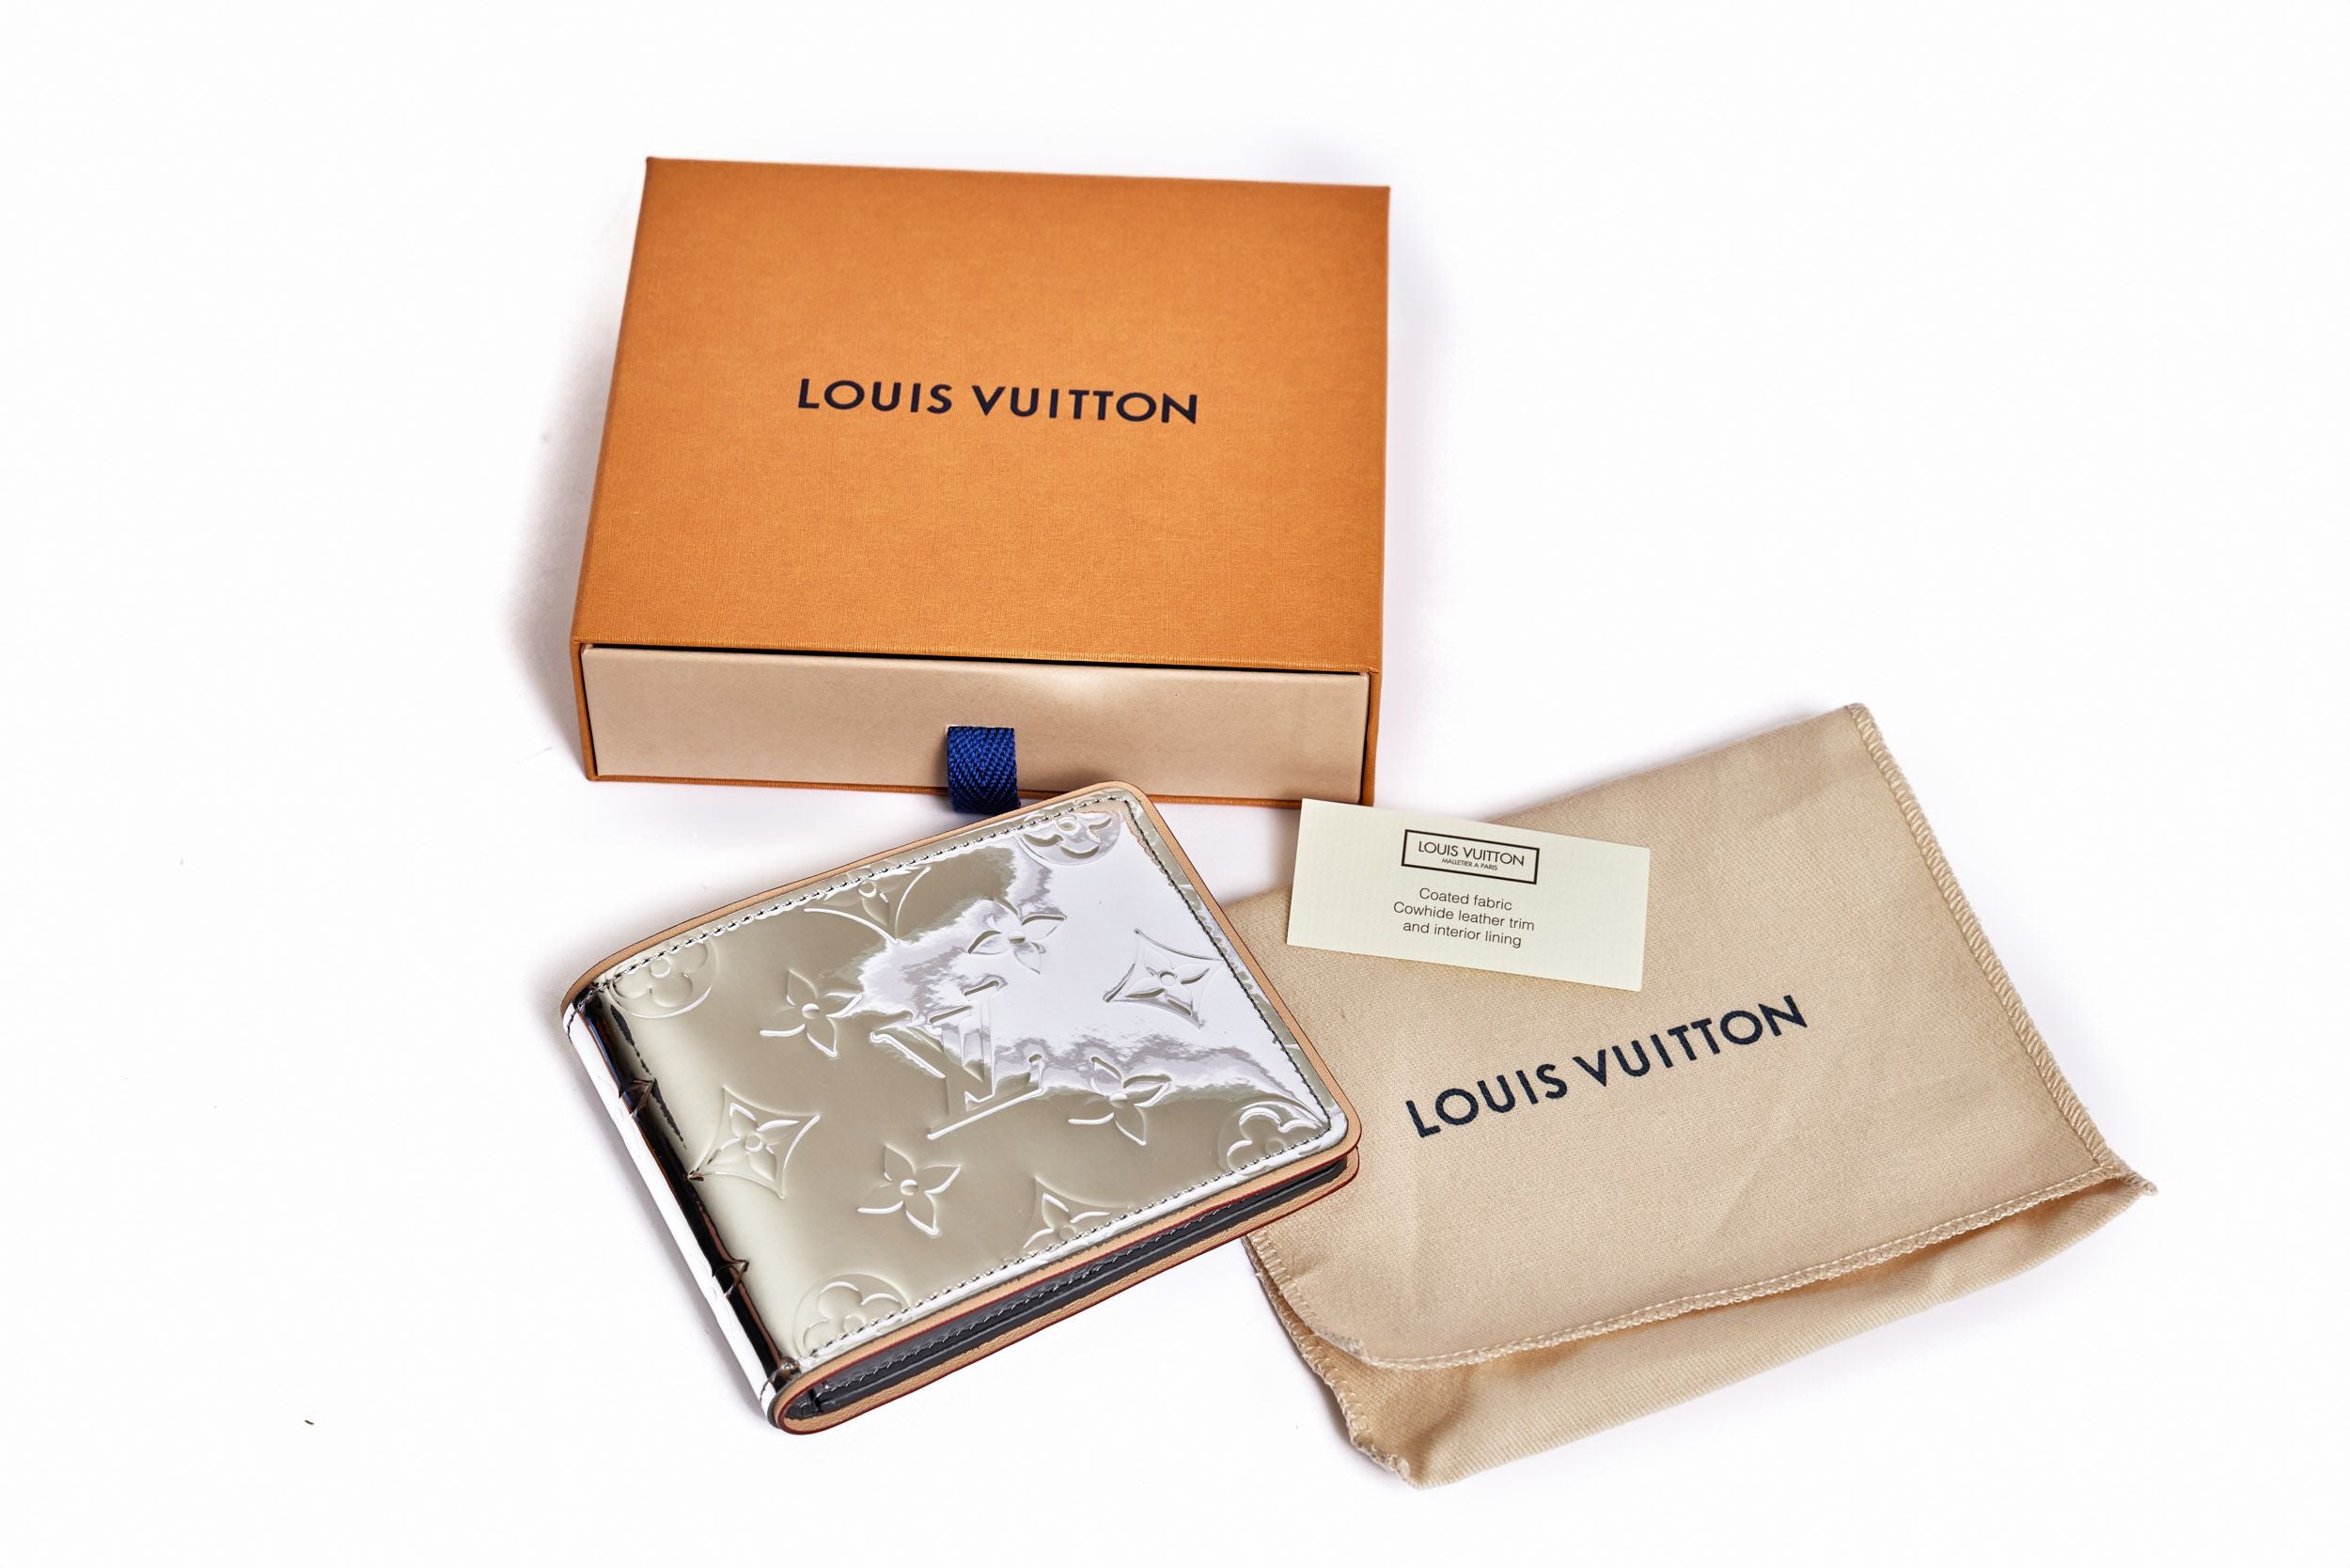 How To Spot a Fake Louis Vuitton Multiple Wallet - Brands Blogger